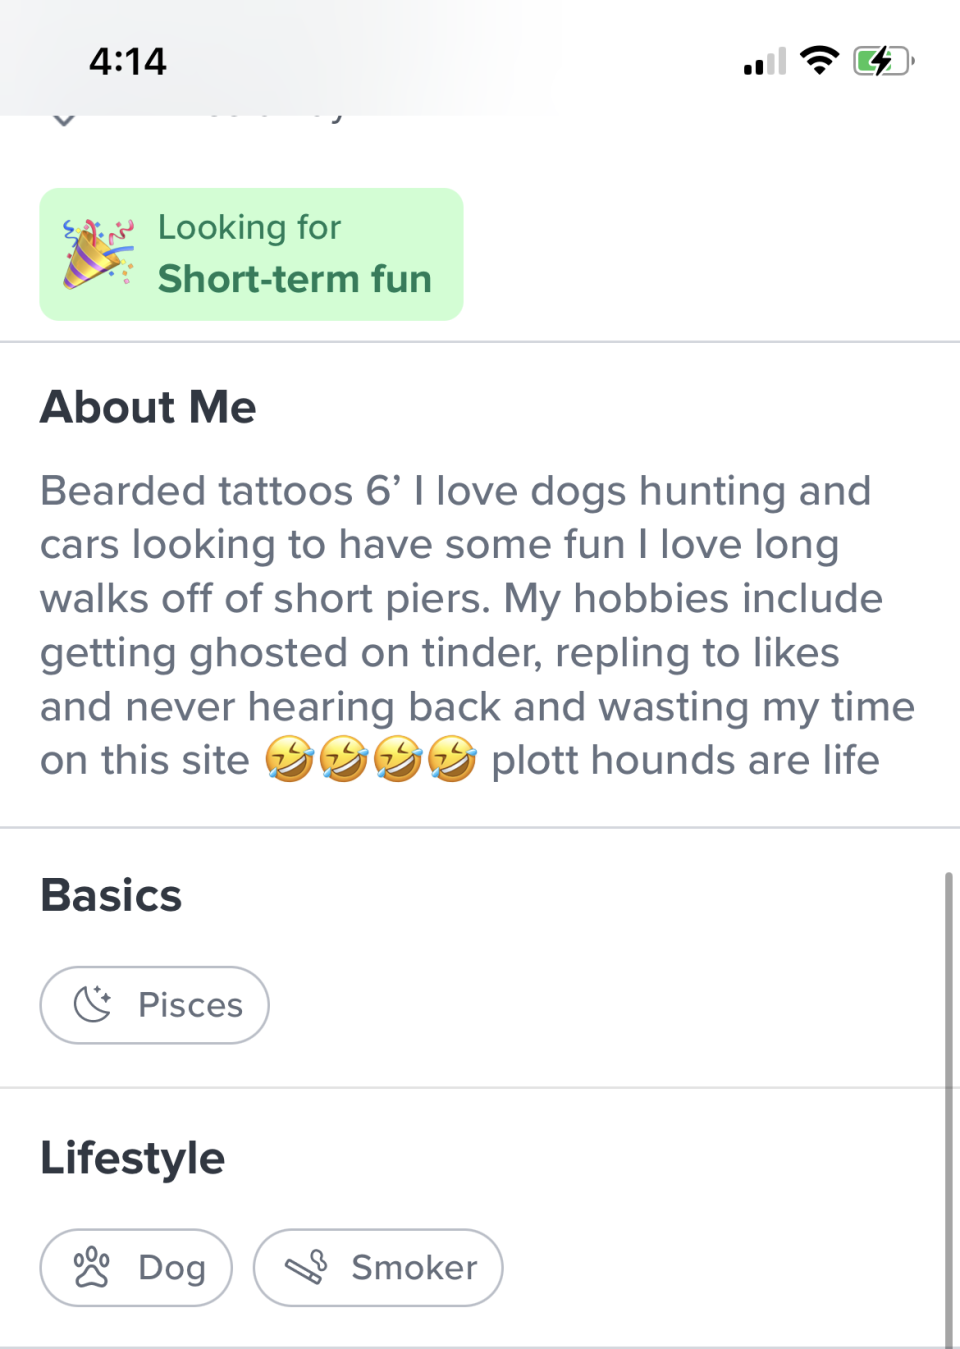 This about me section says "my hobbies include getting ghosted on Tinder, replying to likes and never hearing back, and wasting my time on this site"